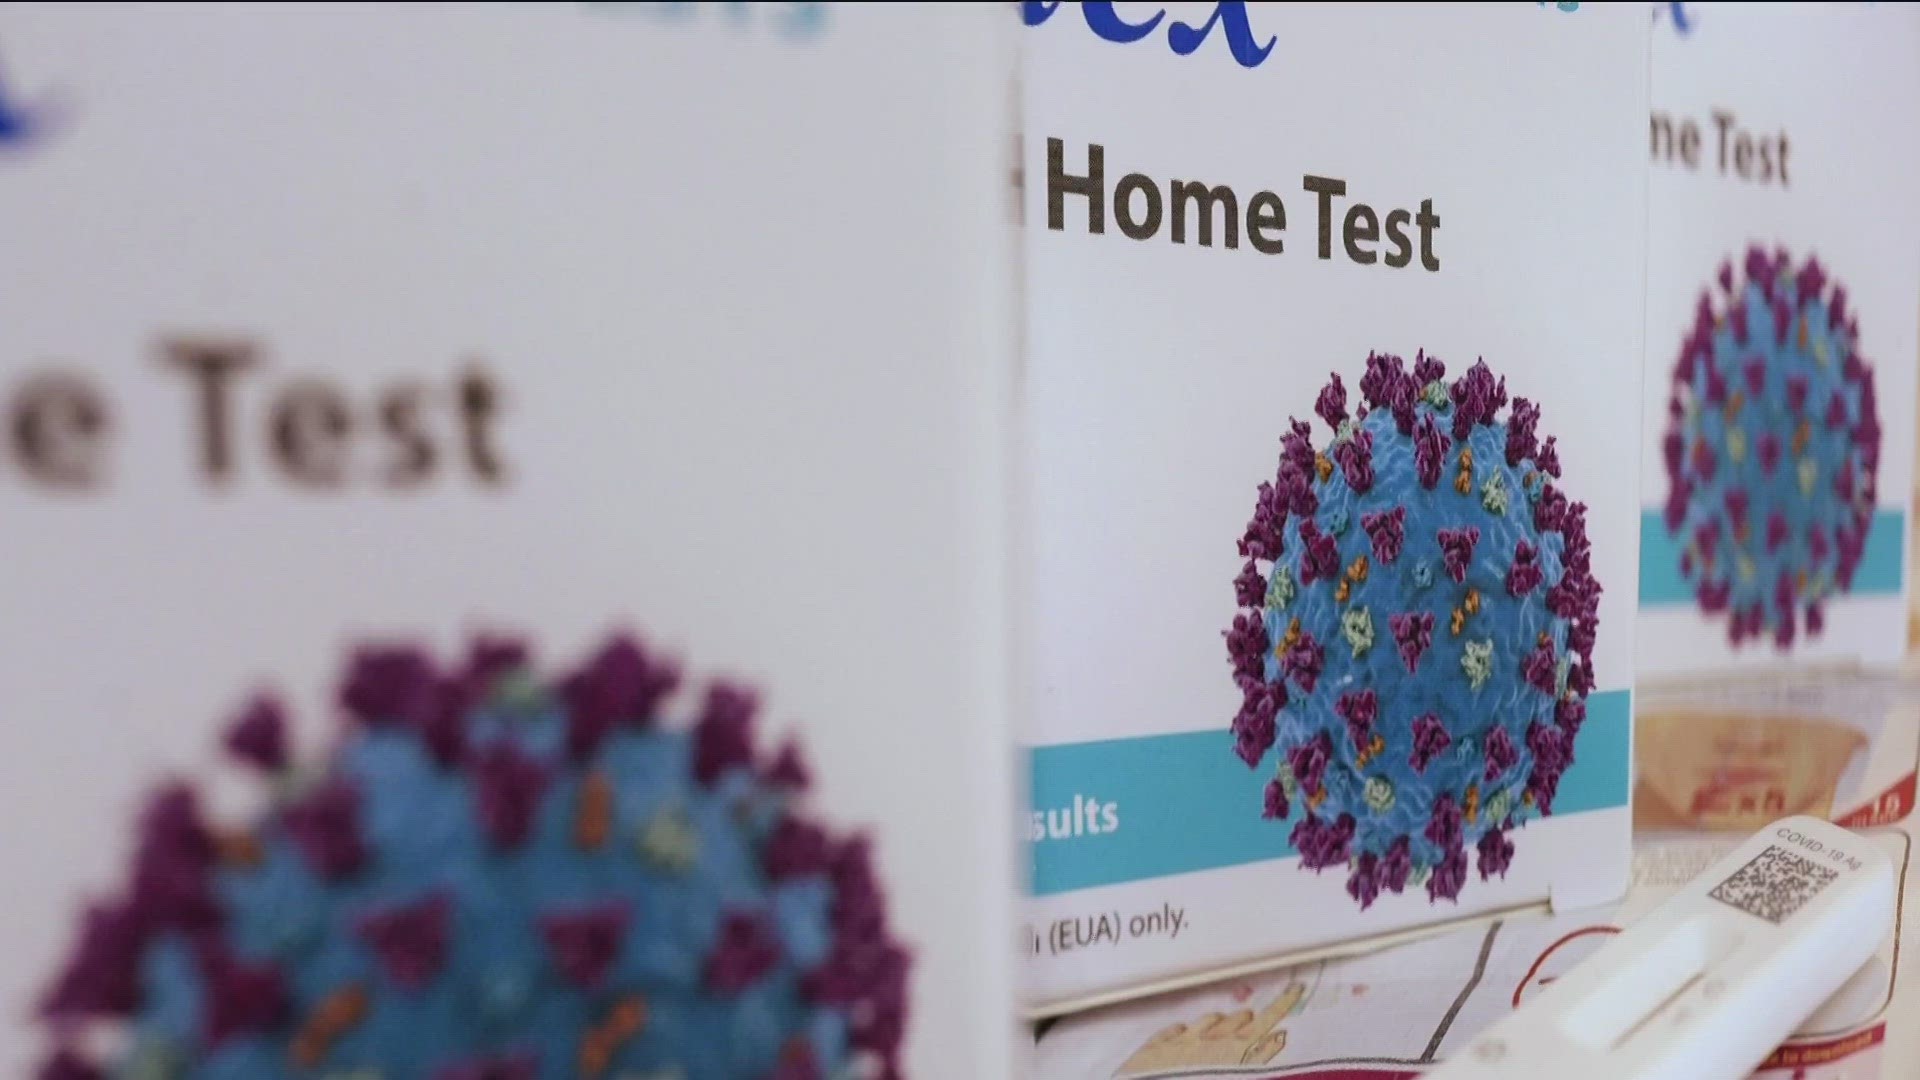 Many Americans stocked up on tests for when someone in their family fell ill.